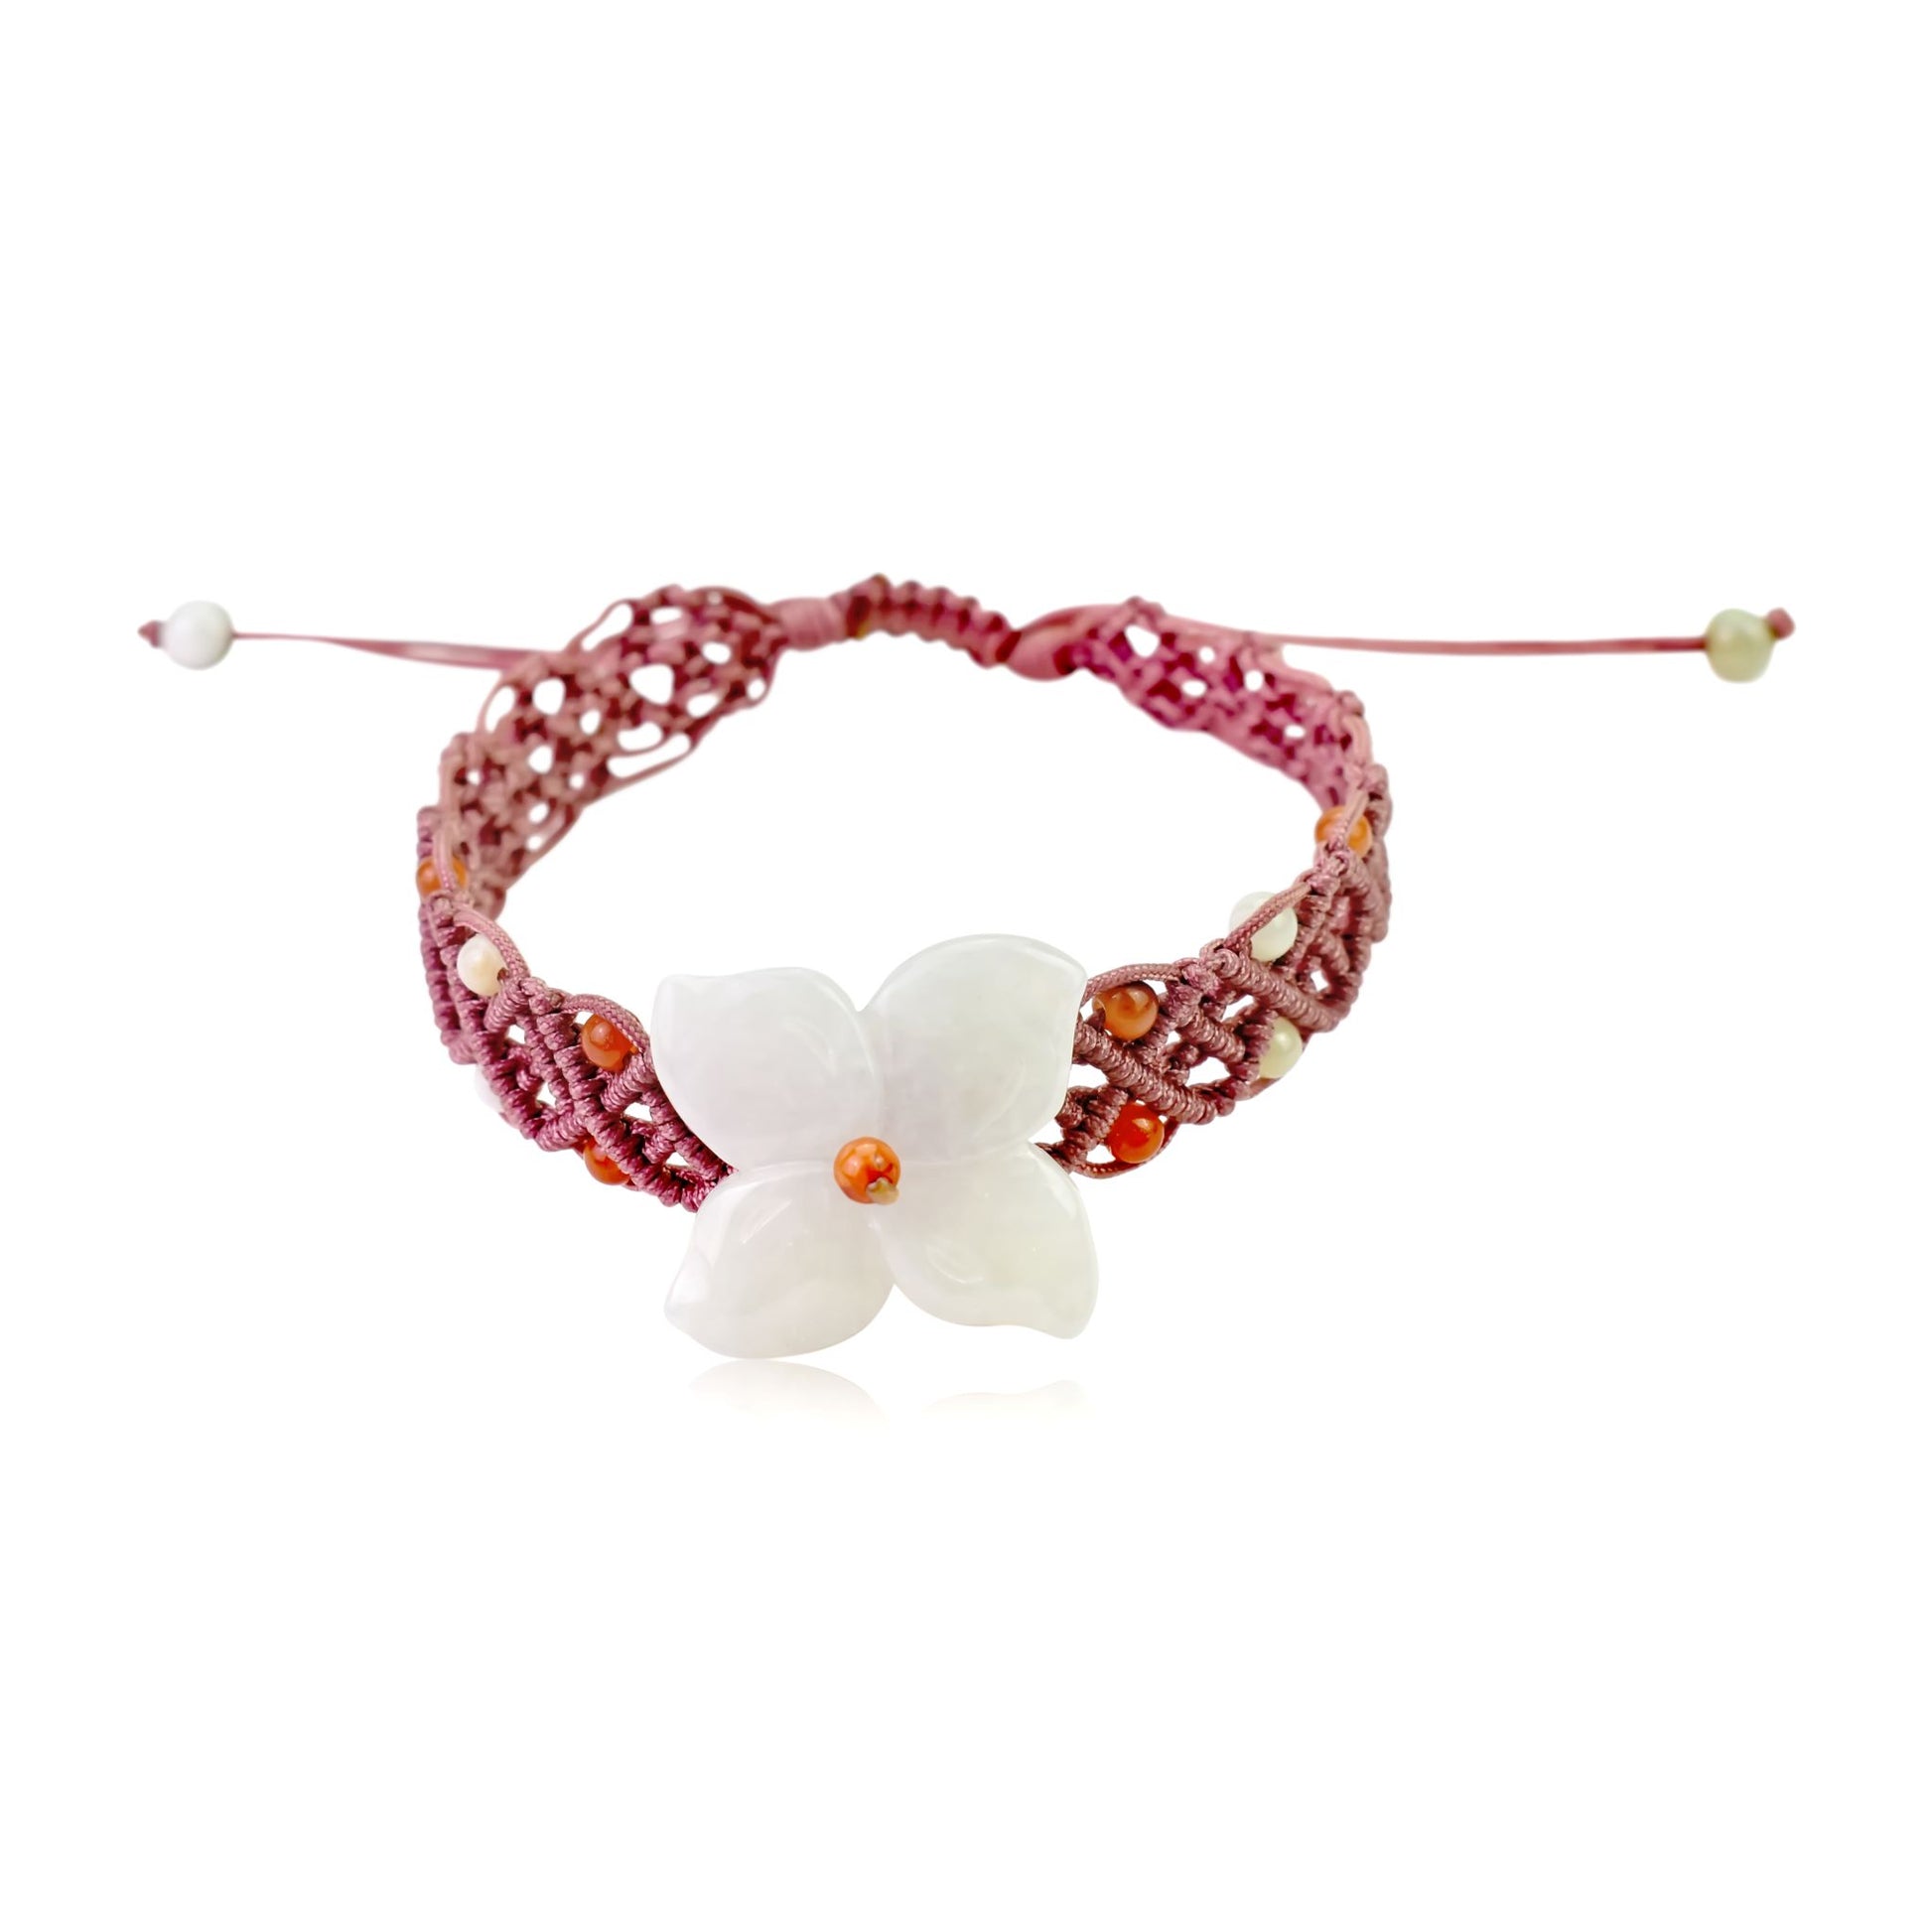 Look Gorgeous with the Peruvian Lily Flower Bracelet made with Lavender Cord